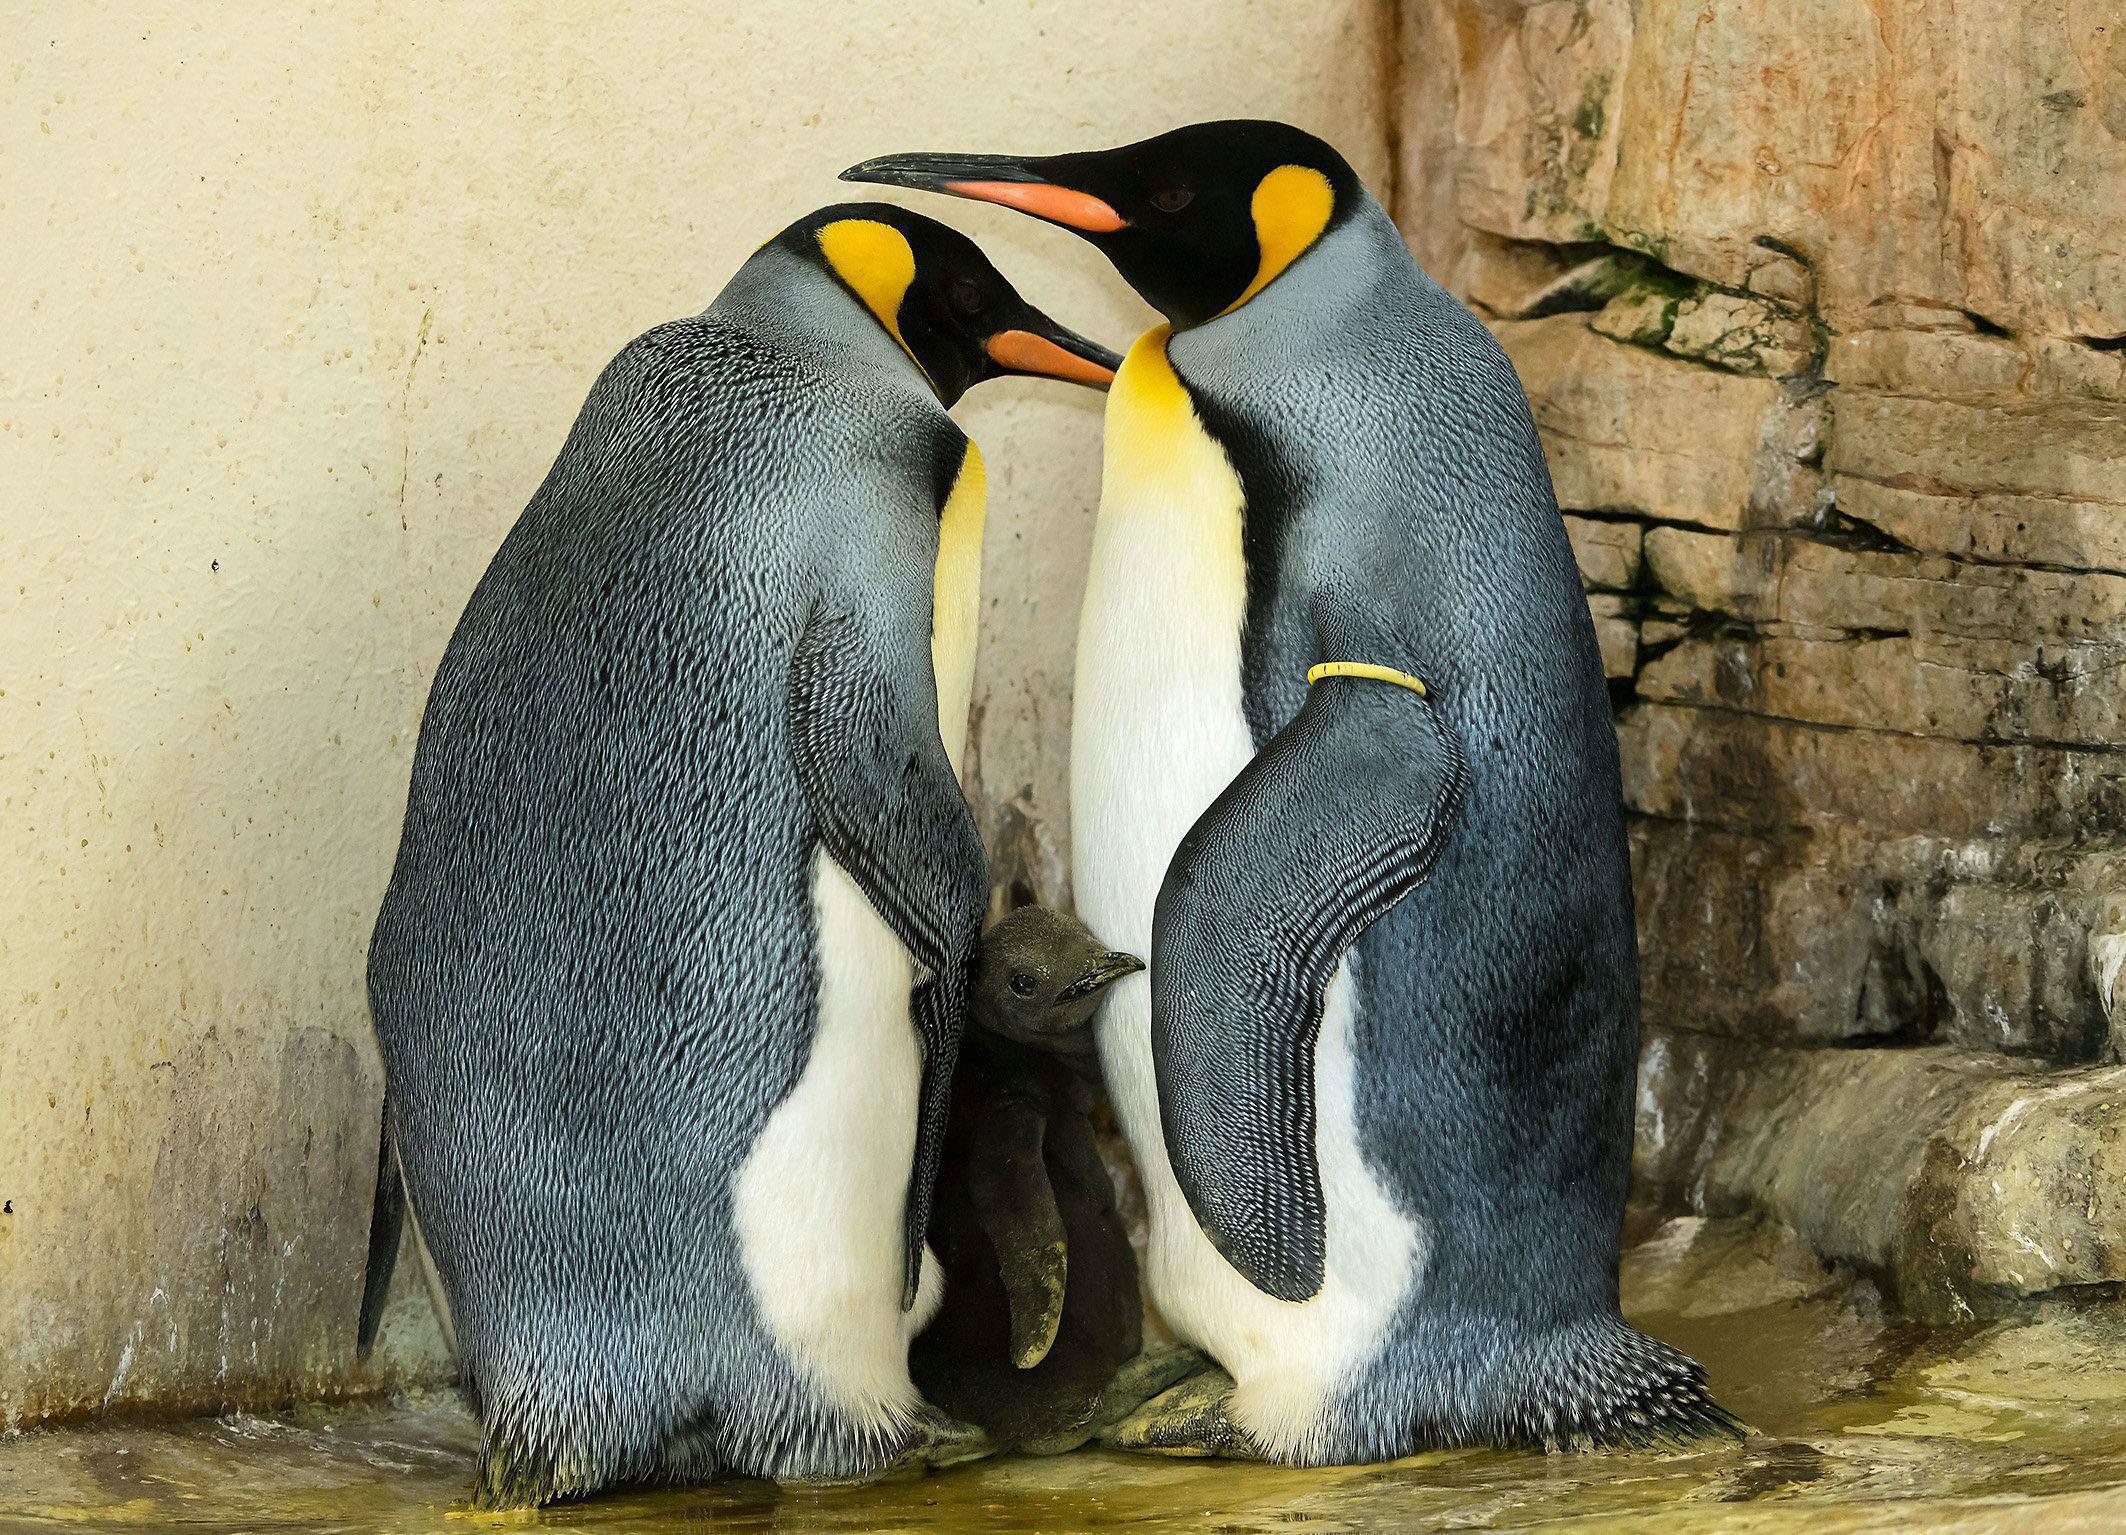 Two king penguins and their chick stand in their enclosure in the zoo of Schoenbrunn in Vienna